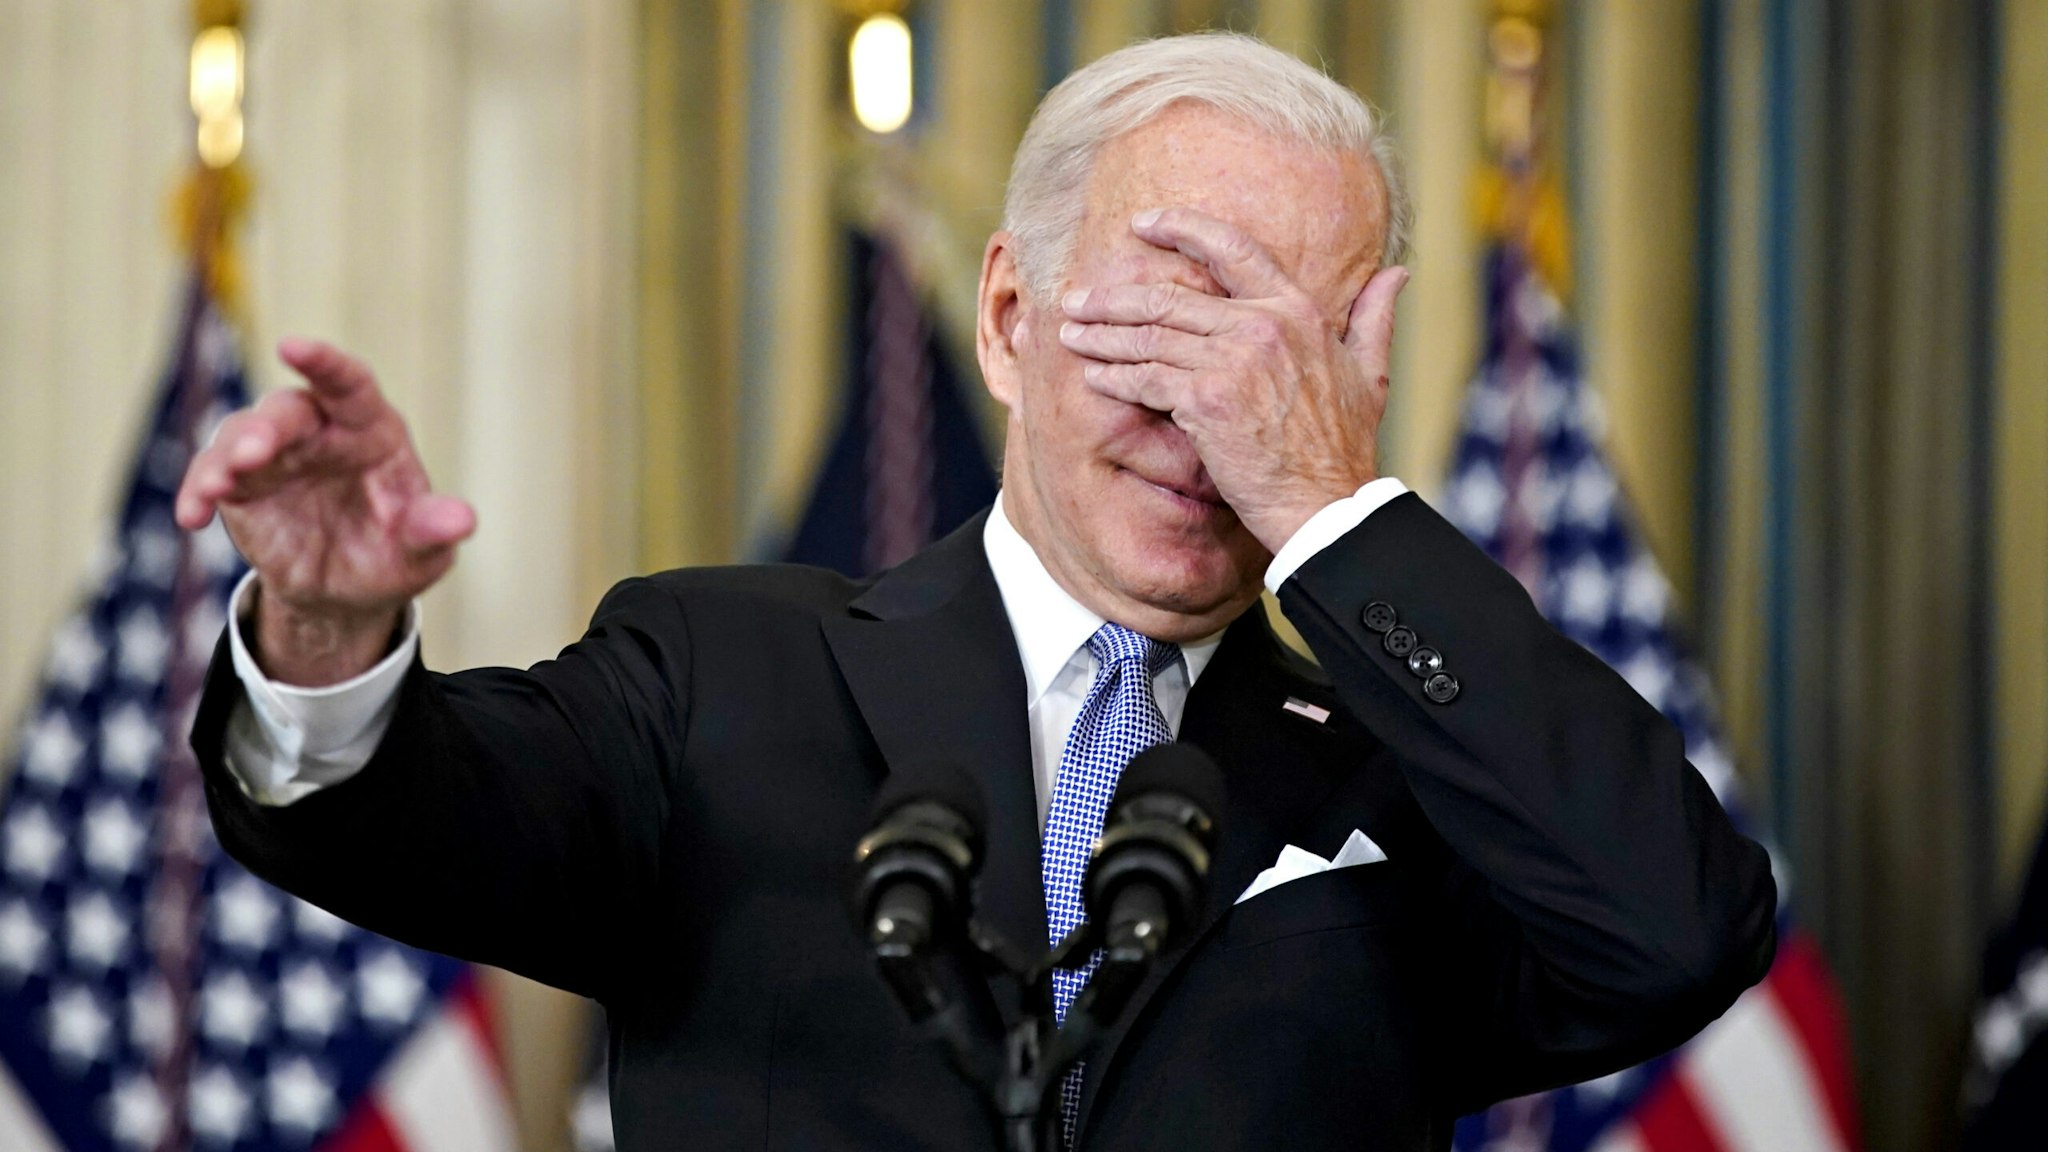 U.S. President Joe Biden covers his eyes to choose a reporter to ask a question after speaking on the passage of the Bipartisan Infrastructure Deal in the State Dining Room of the White House in Washington, D.C., U.S., on Saturday, Nov. 6, 2021. The House on Friday passed the biggest U.S. infrastructure package in decades, marking a victory for President Biden and unleashing $550 billion of fresh spending on roads, bridges, public transit and other projects in coming years.